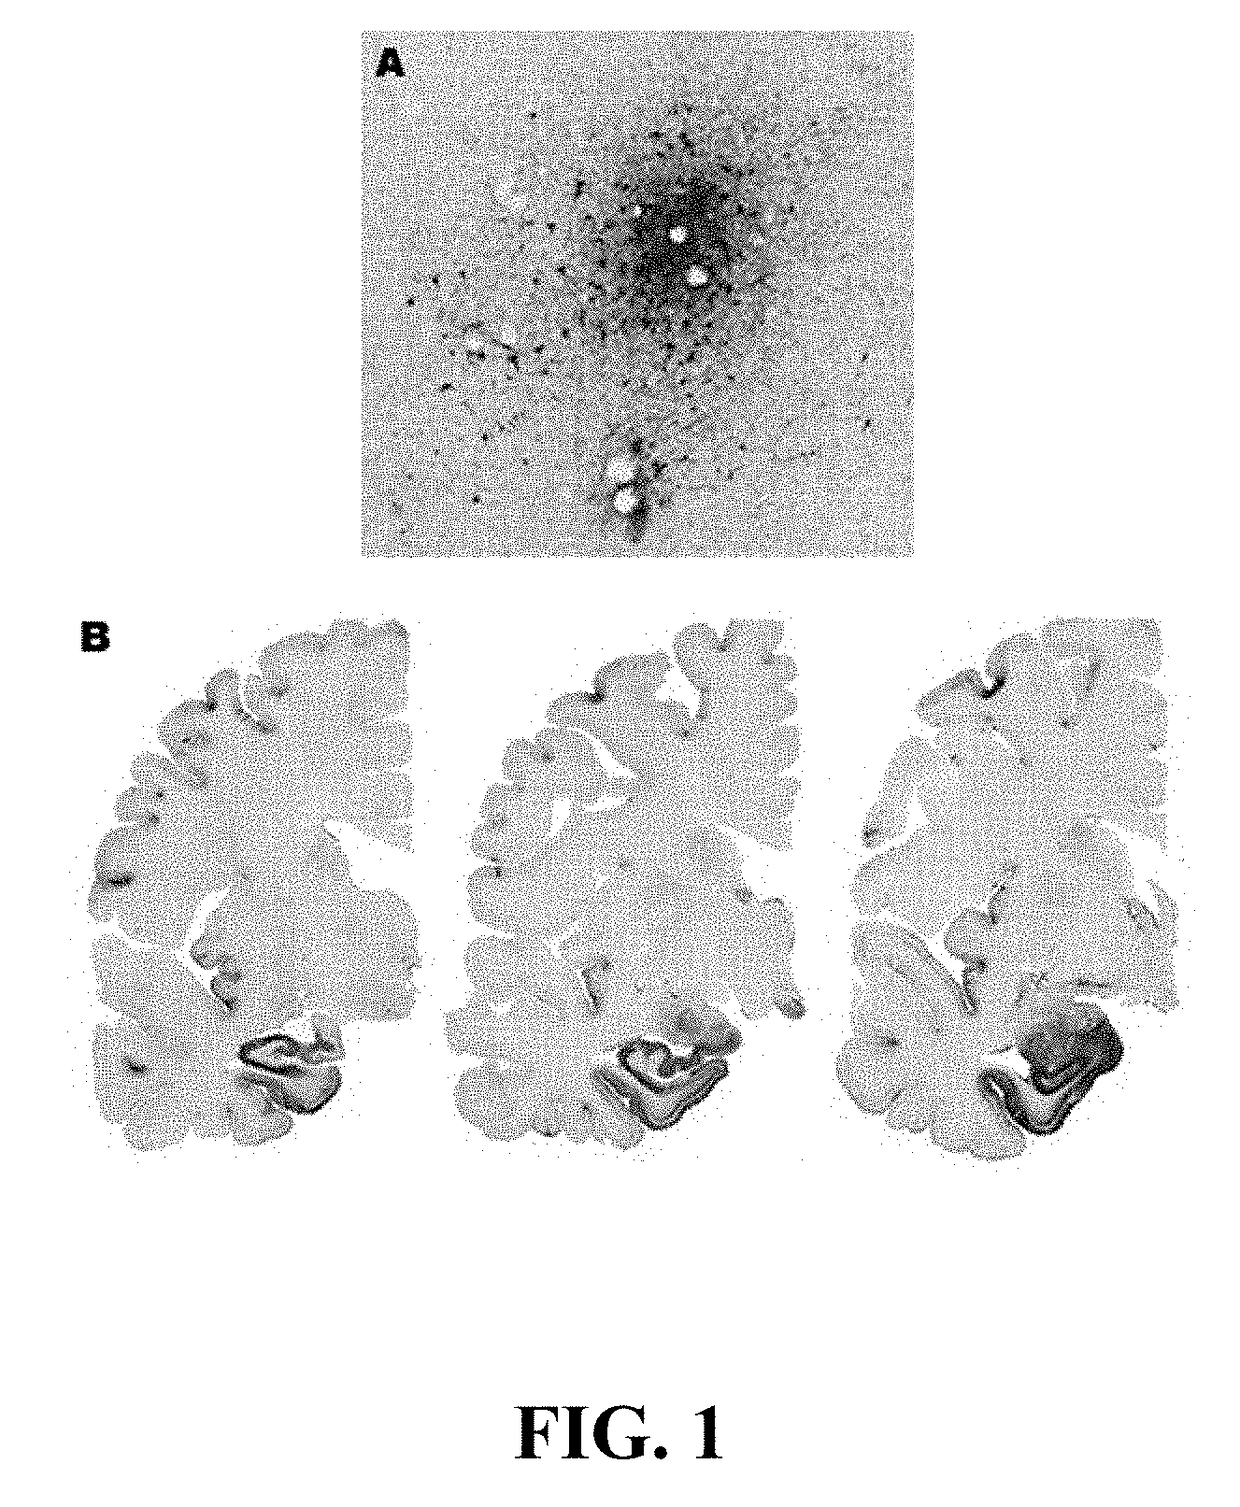 Method for preventing and/or treating chronic traumatic encephalopathy - iii